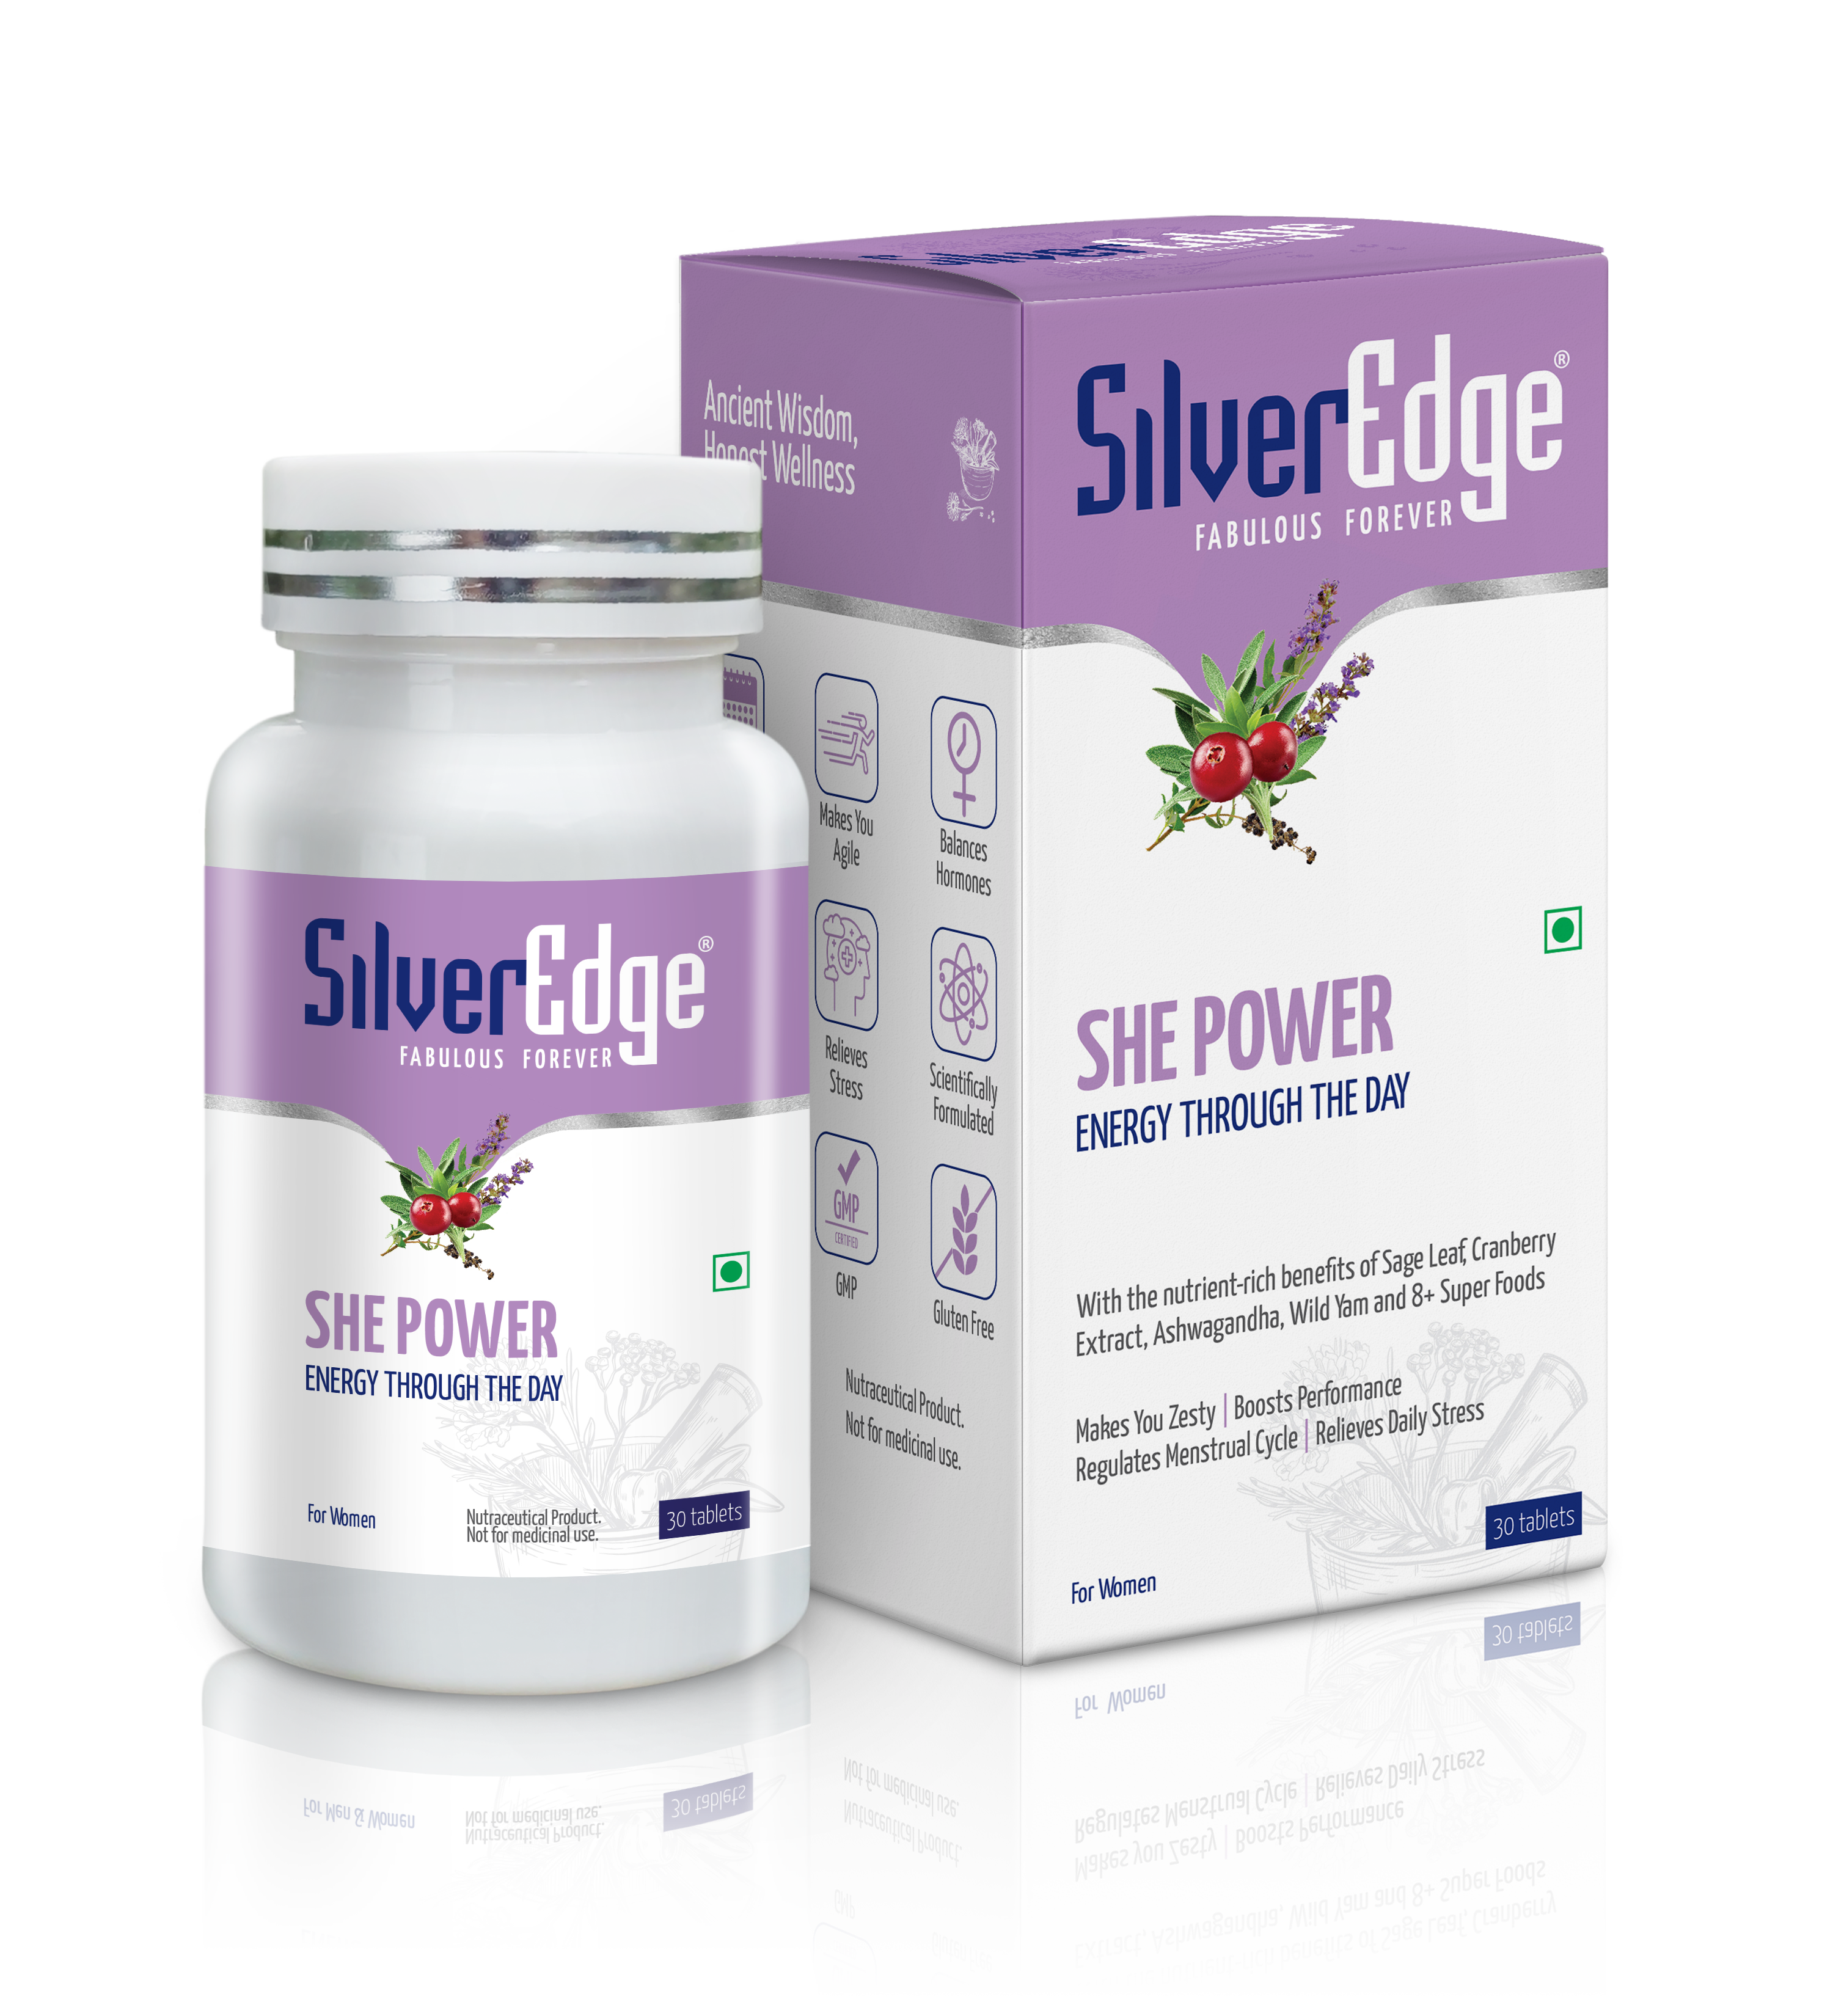 best women's energy boosters in india, women's energy boosters, women's energy boosters in india, best women's energy boosters, buy she power tablets in india, hormonal imbalance supplement for women, SilverEdge, she power tablets, she power tablets in india, SilverEdge